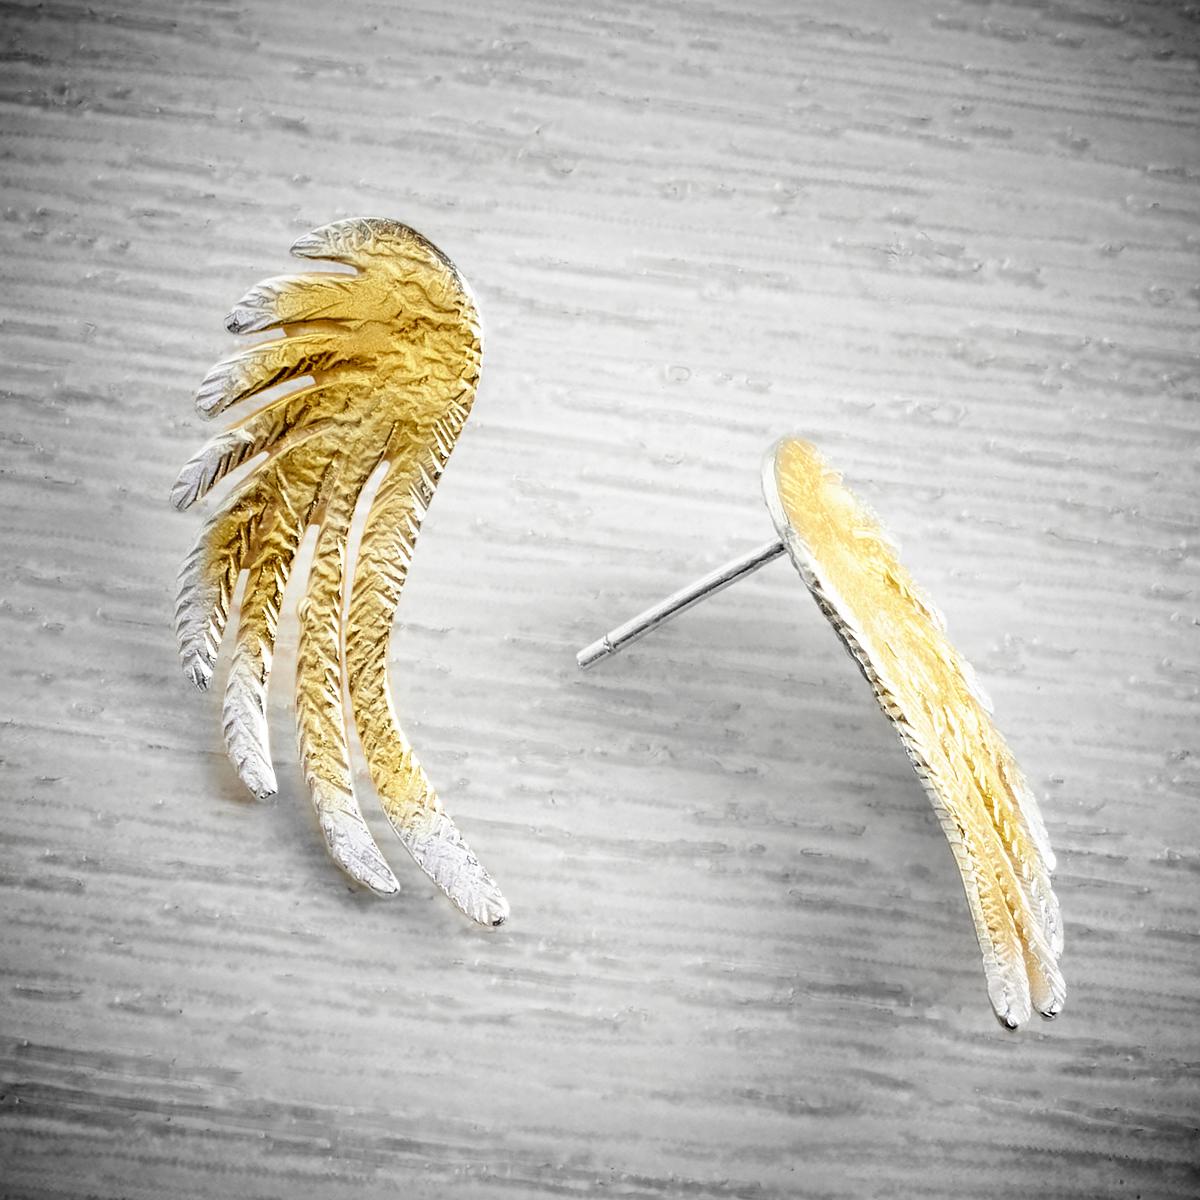 large silver and gold stud angel wing earrings by Fi Mehra available at THE JEWELLERY MAKERS, image property of EMMA WHITE-1